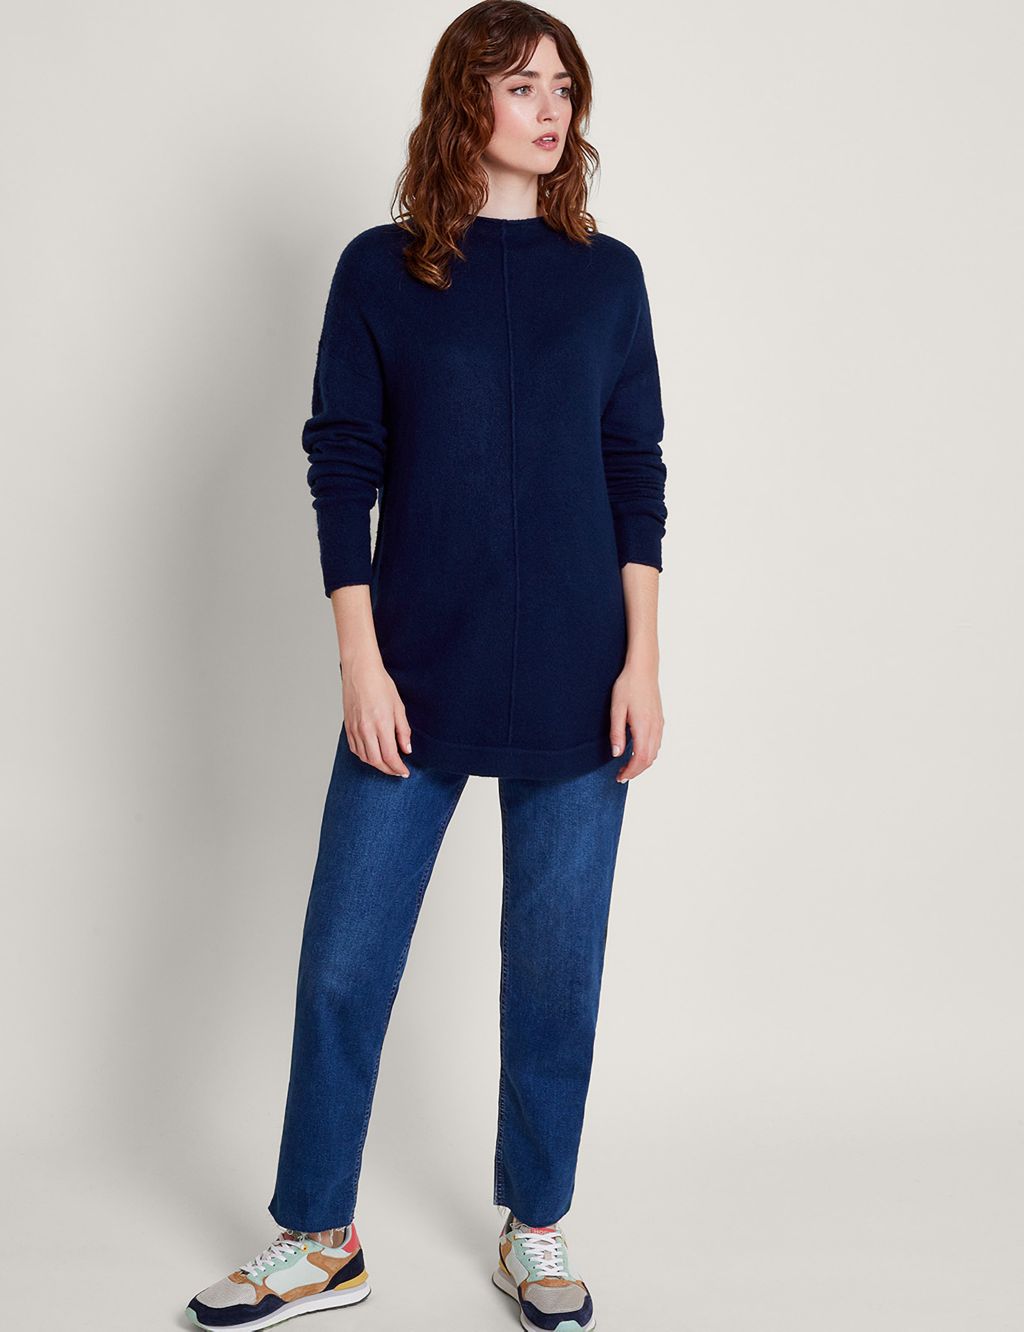 Crew Neck Longline Jumper with Wool image 3